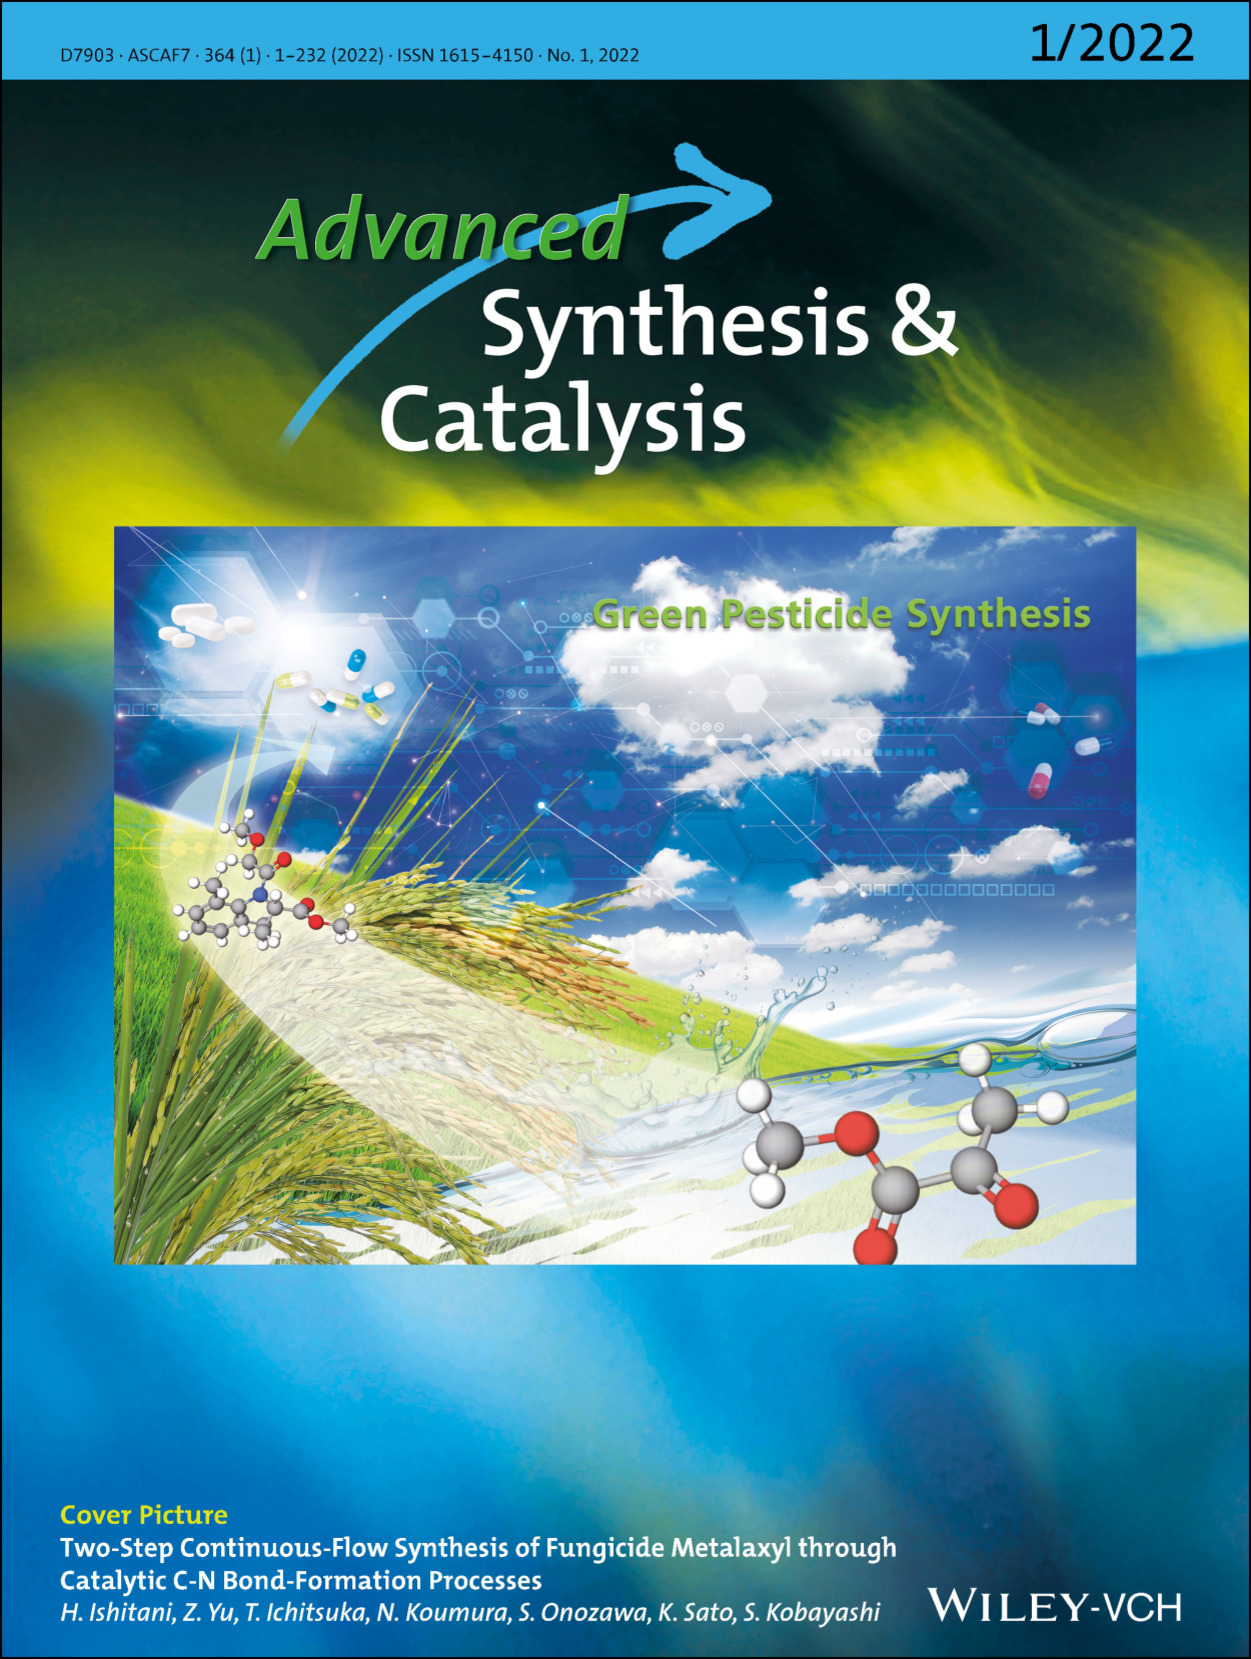 Front Cover Picture: Two‐Step Continuous‐Flow Synthesis of Fungicide Metalaxyl through Catalytic C−N Bond‐Formation Processes (Adv. Synth. Catal. 1/2022)